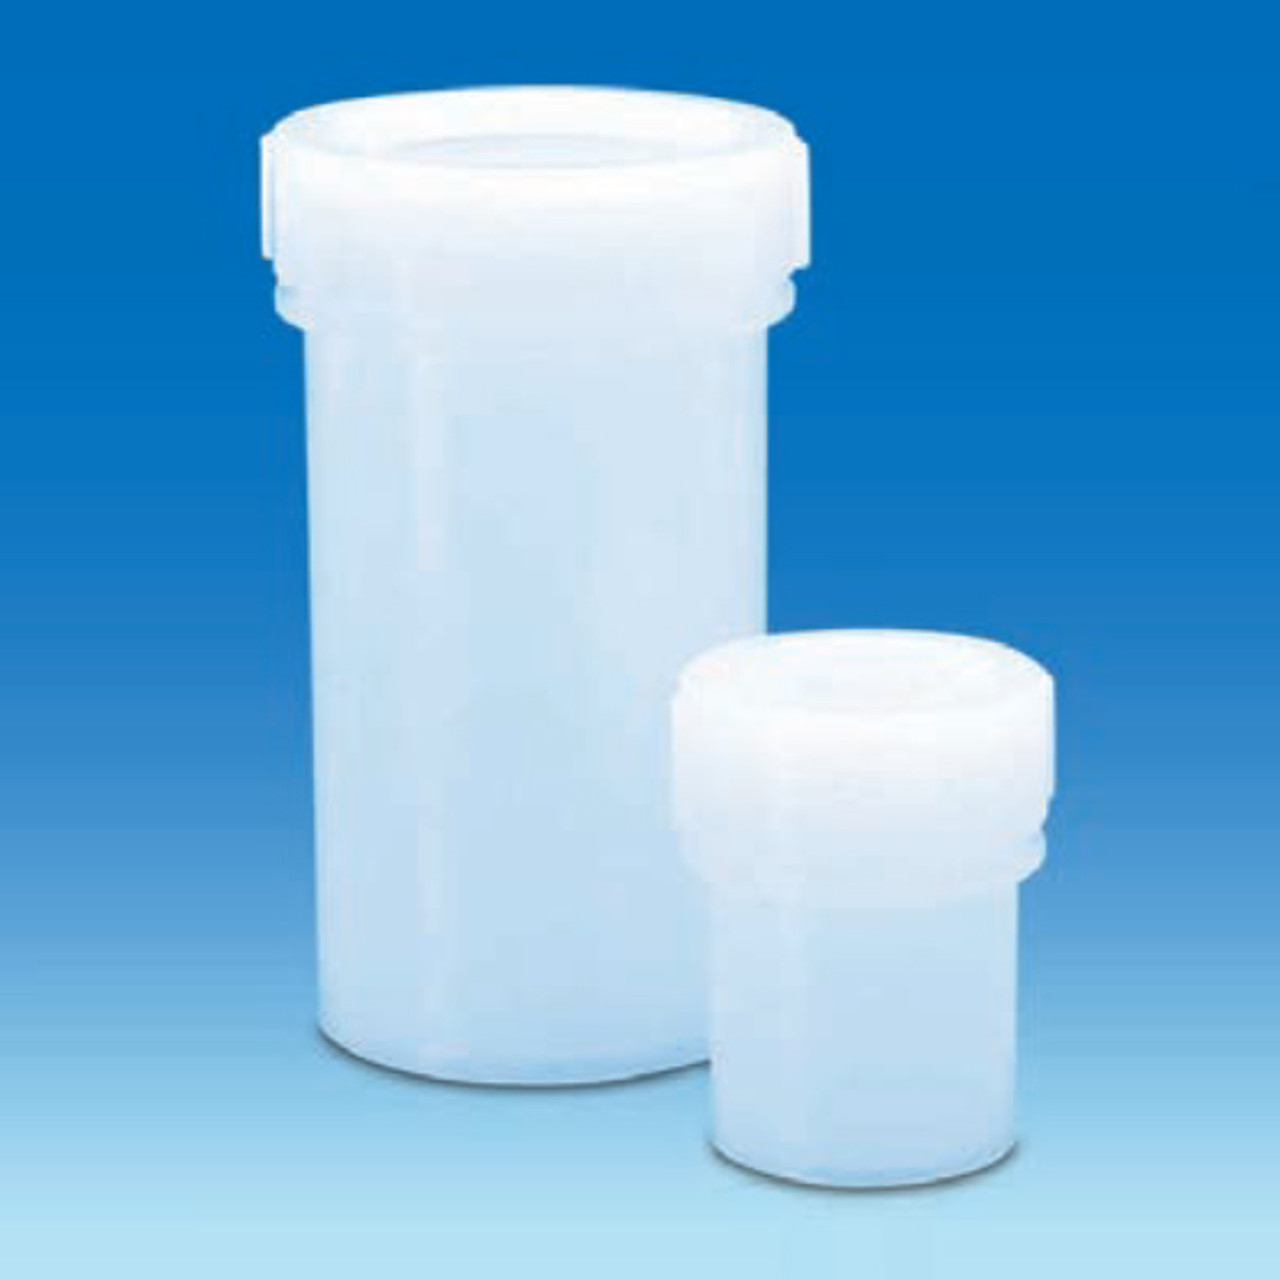 BrandTech VITLAB, Sample Container with Screw Cap, 30mL, PFA, V130297,  BrandTech VITLAB, Sample Container with Screw Cap, 30mL, PFA, V130297